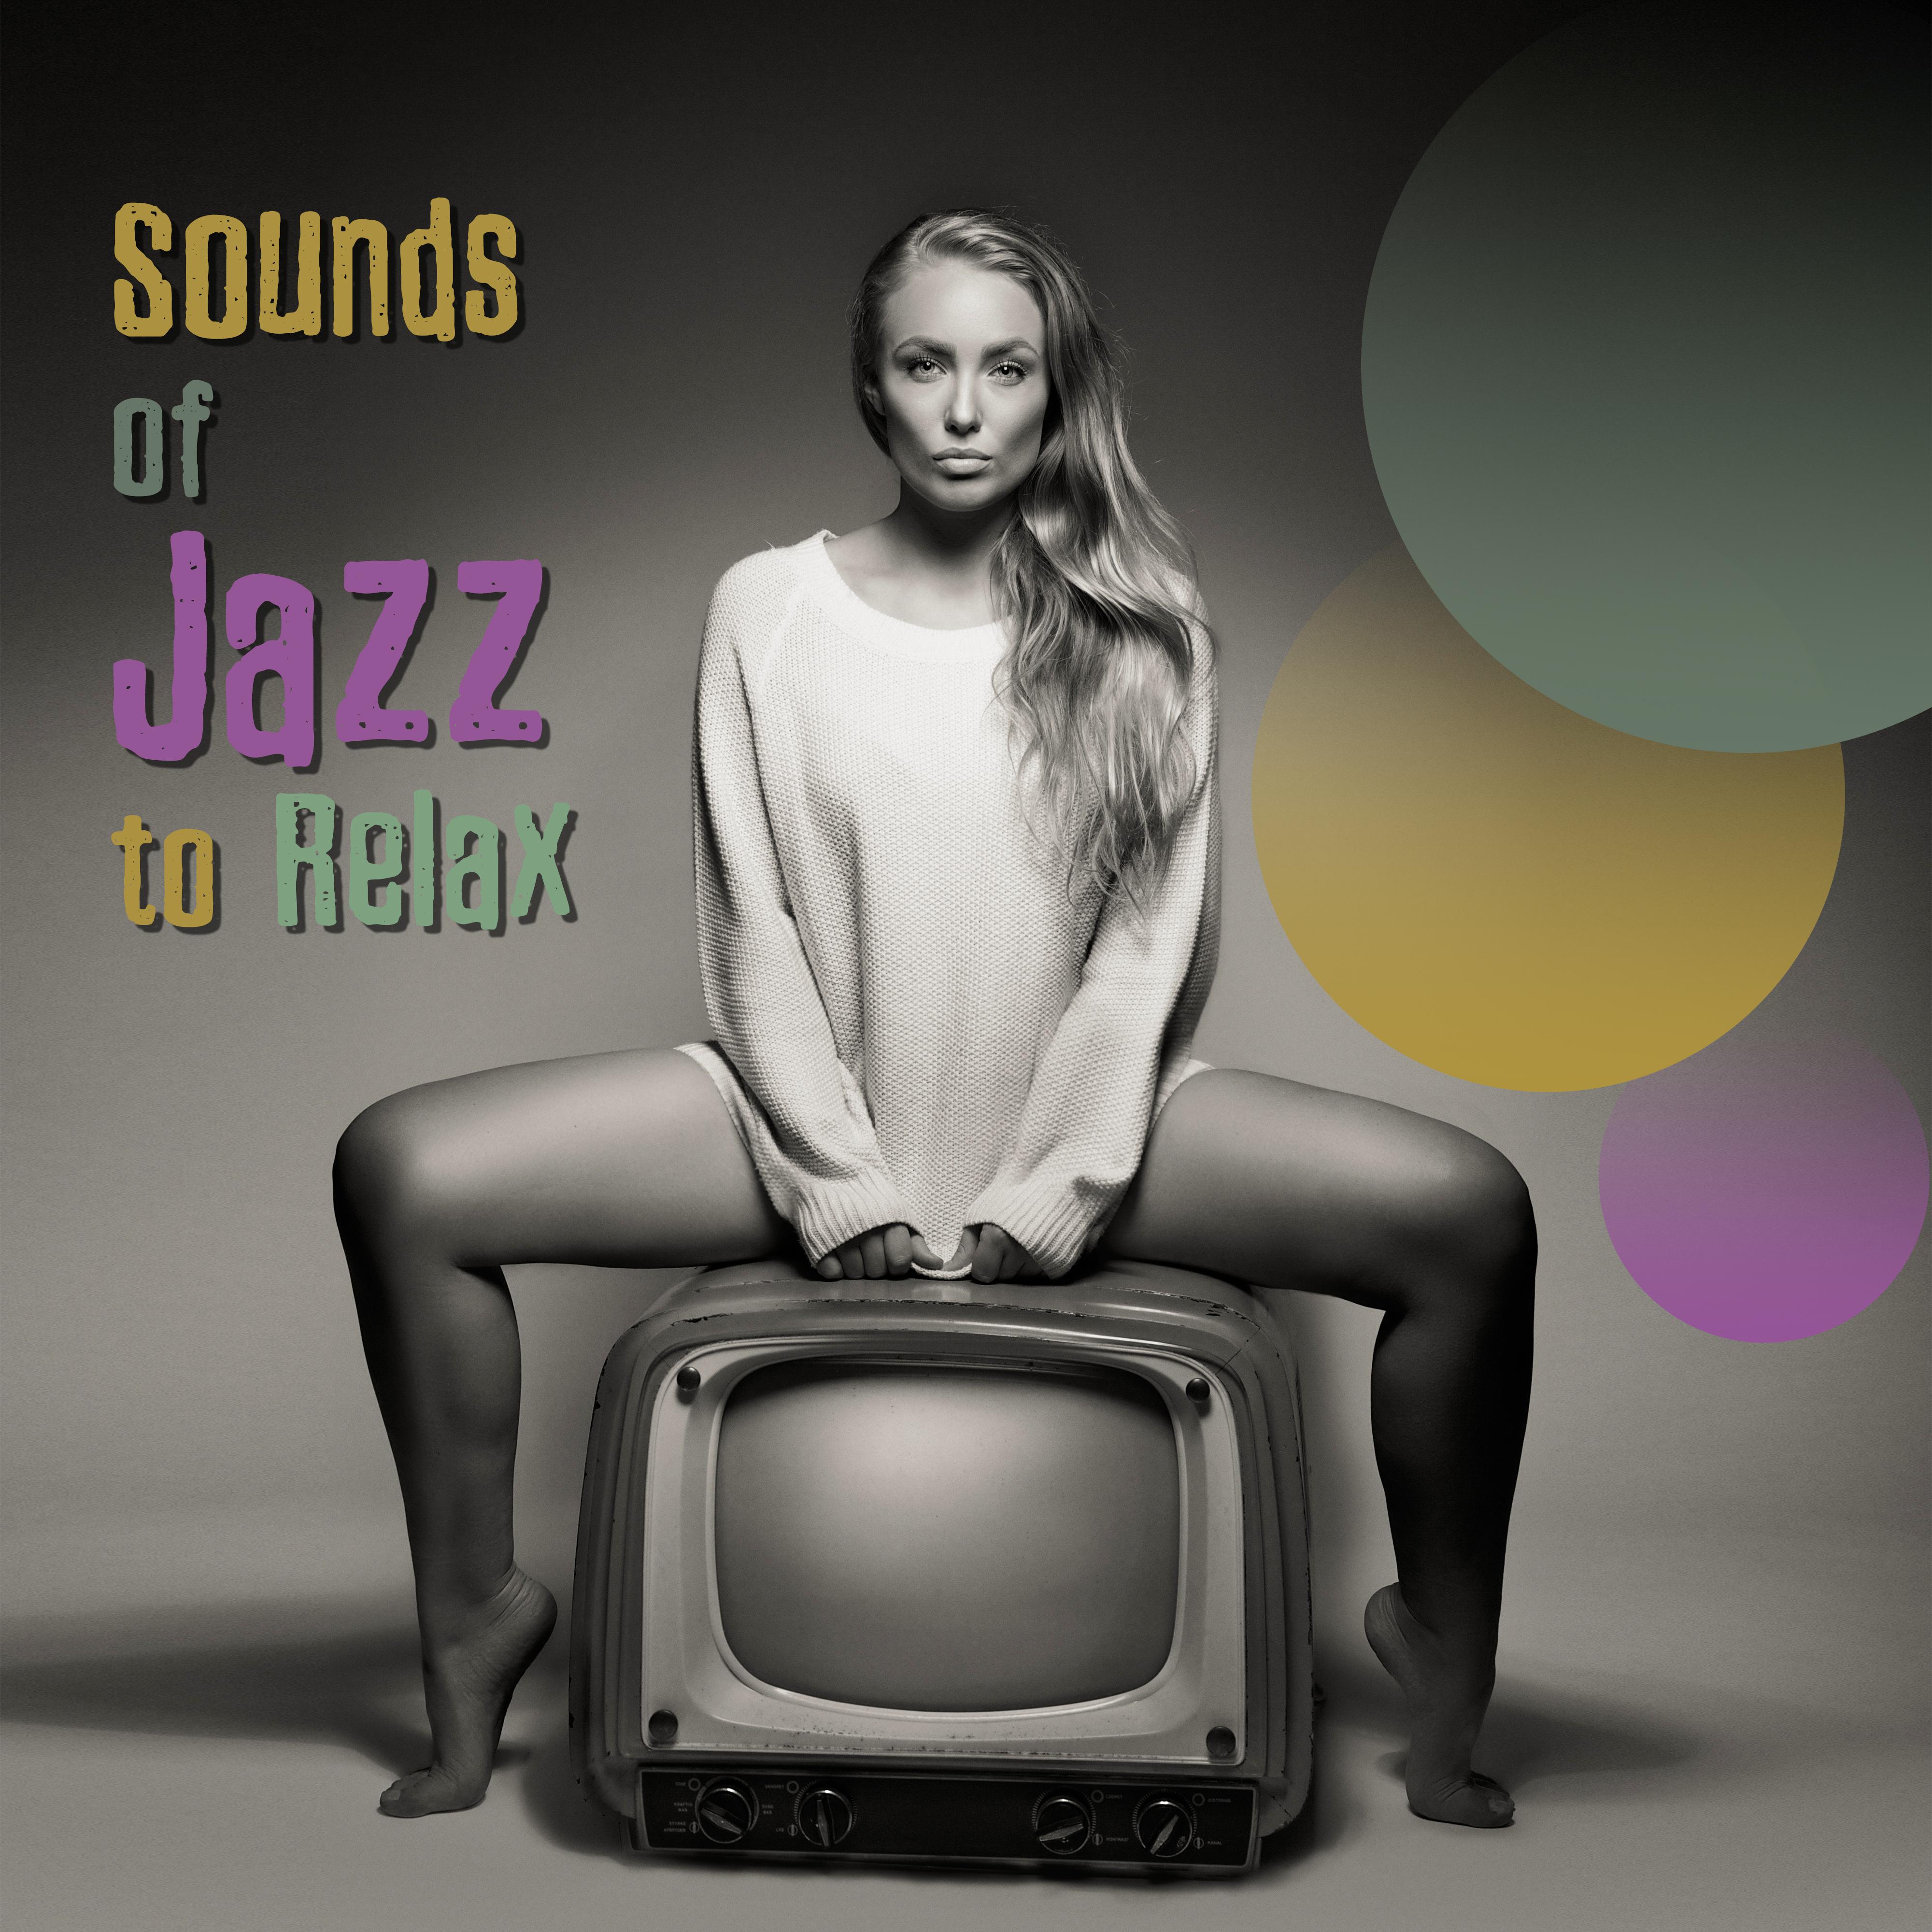 Sounds of Jazz to Relax – Instrumental Music, Calm Jazz, Anti Stress Sounds, Chilled Time, Peaceful Jazz